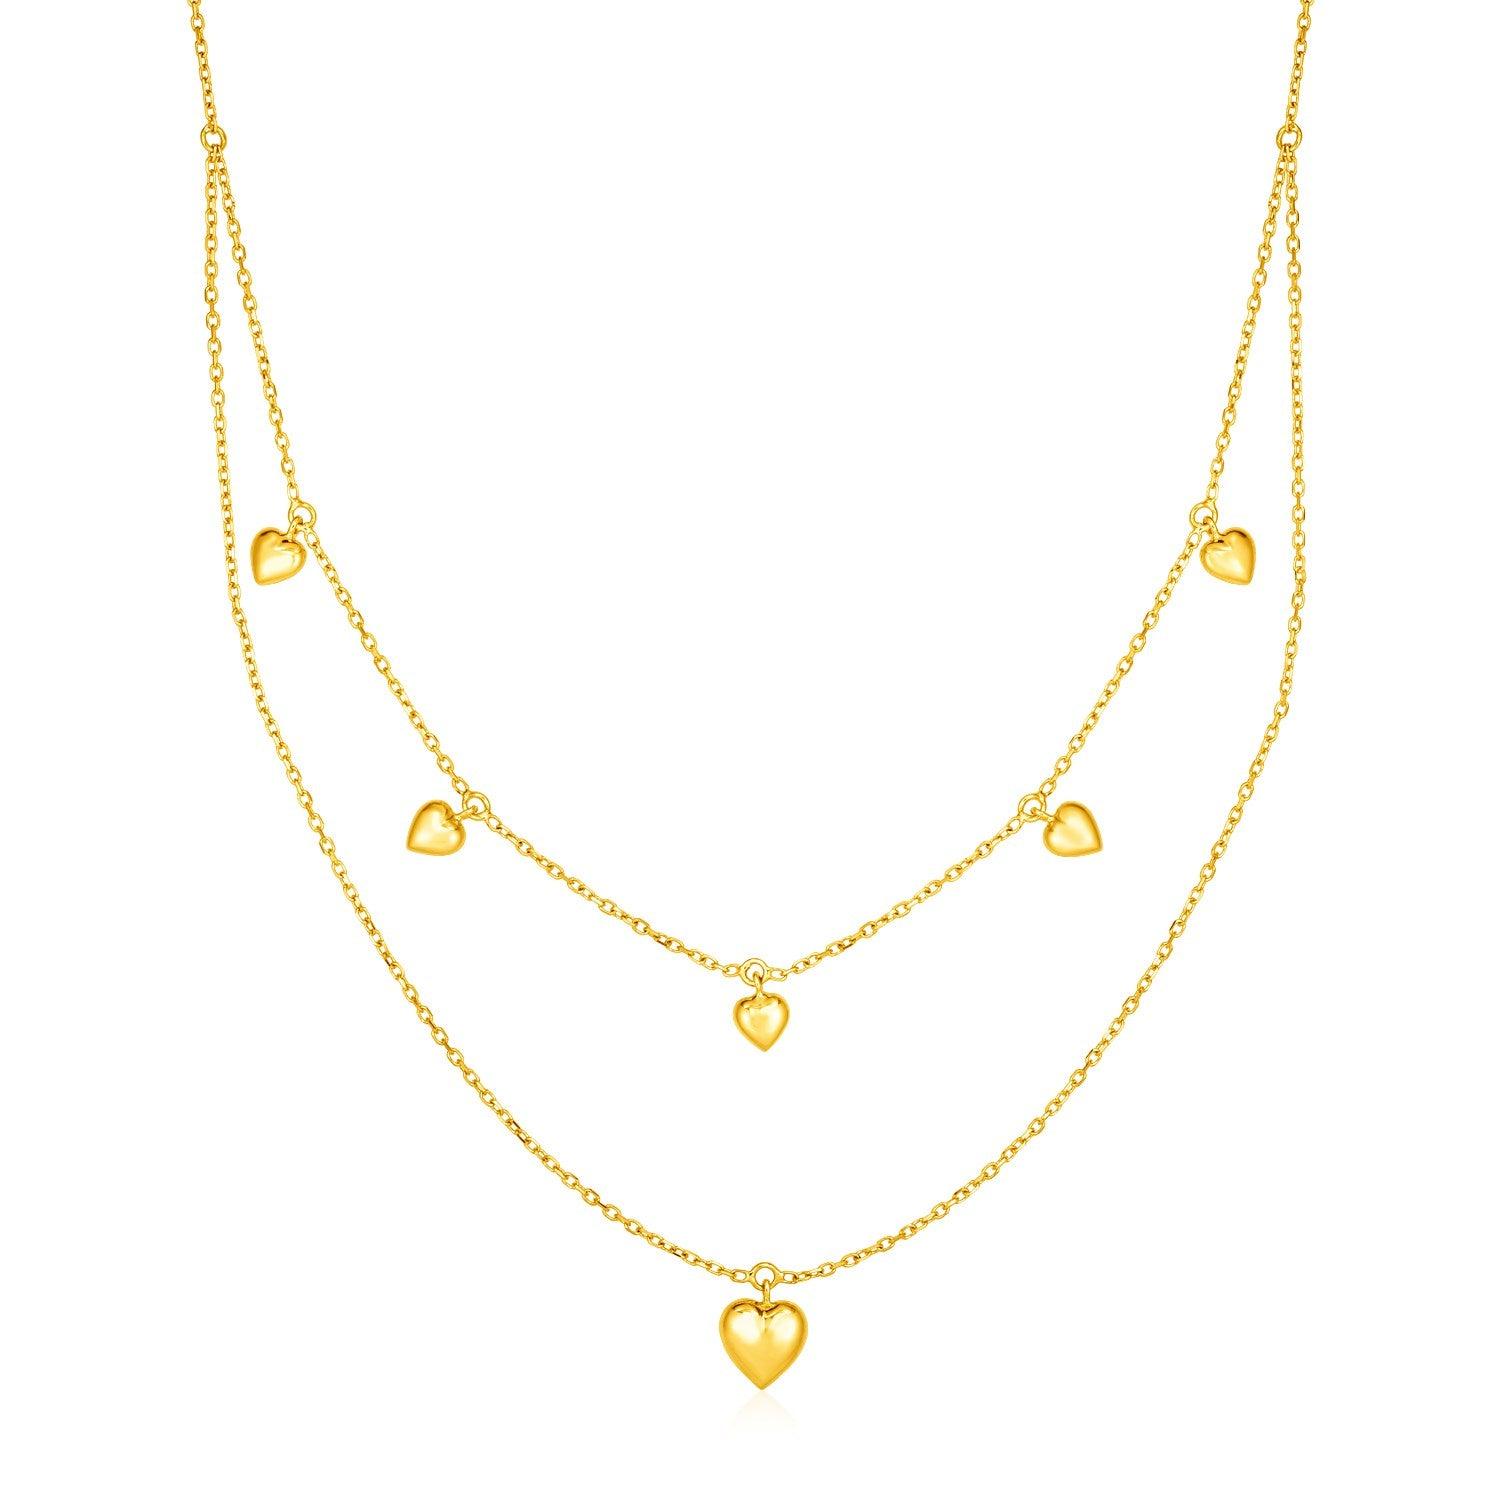 14k Yellow Gold Two Strand Necklace with Puffed Heart Drops freeshipping - Higher Class Elegance